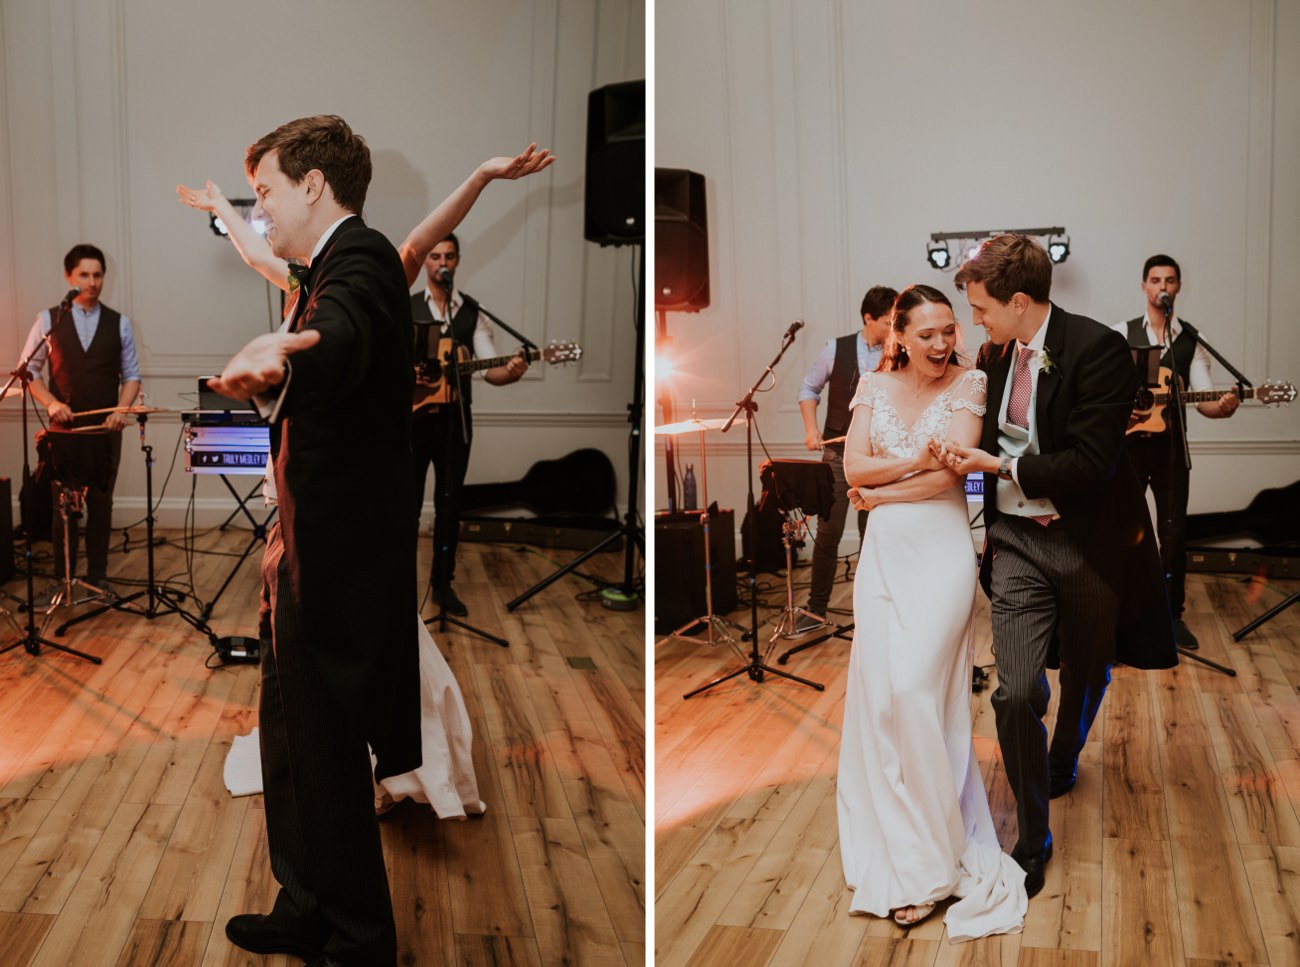 Bride and groom first dance at Fulham Palace